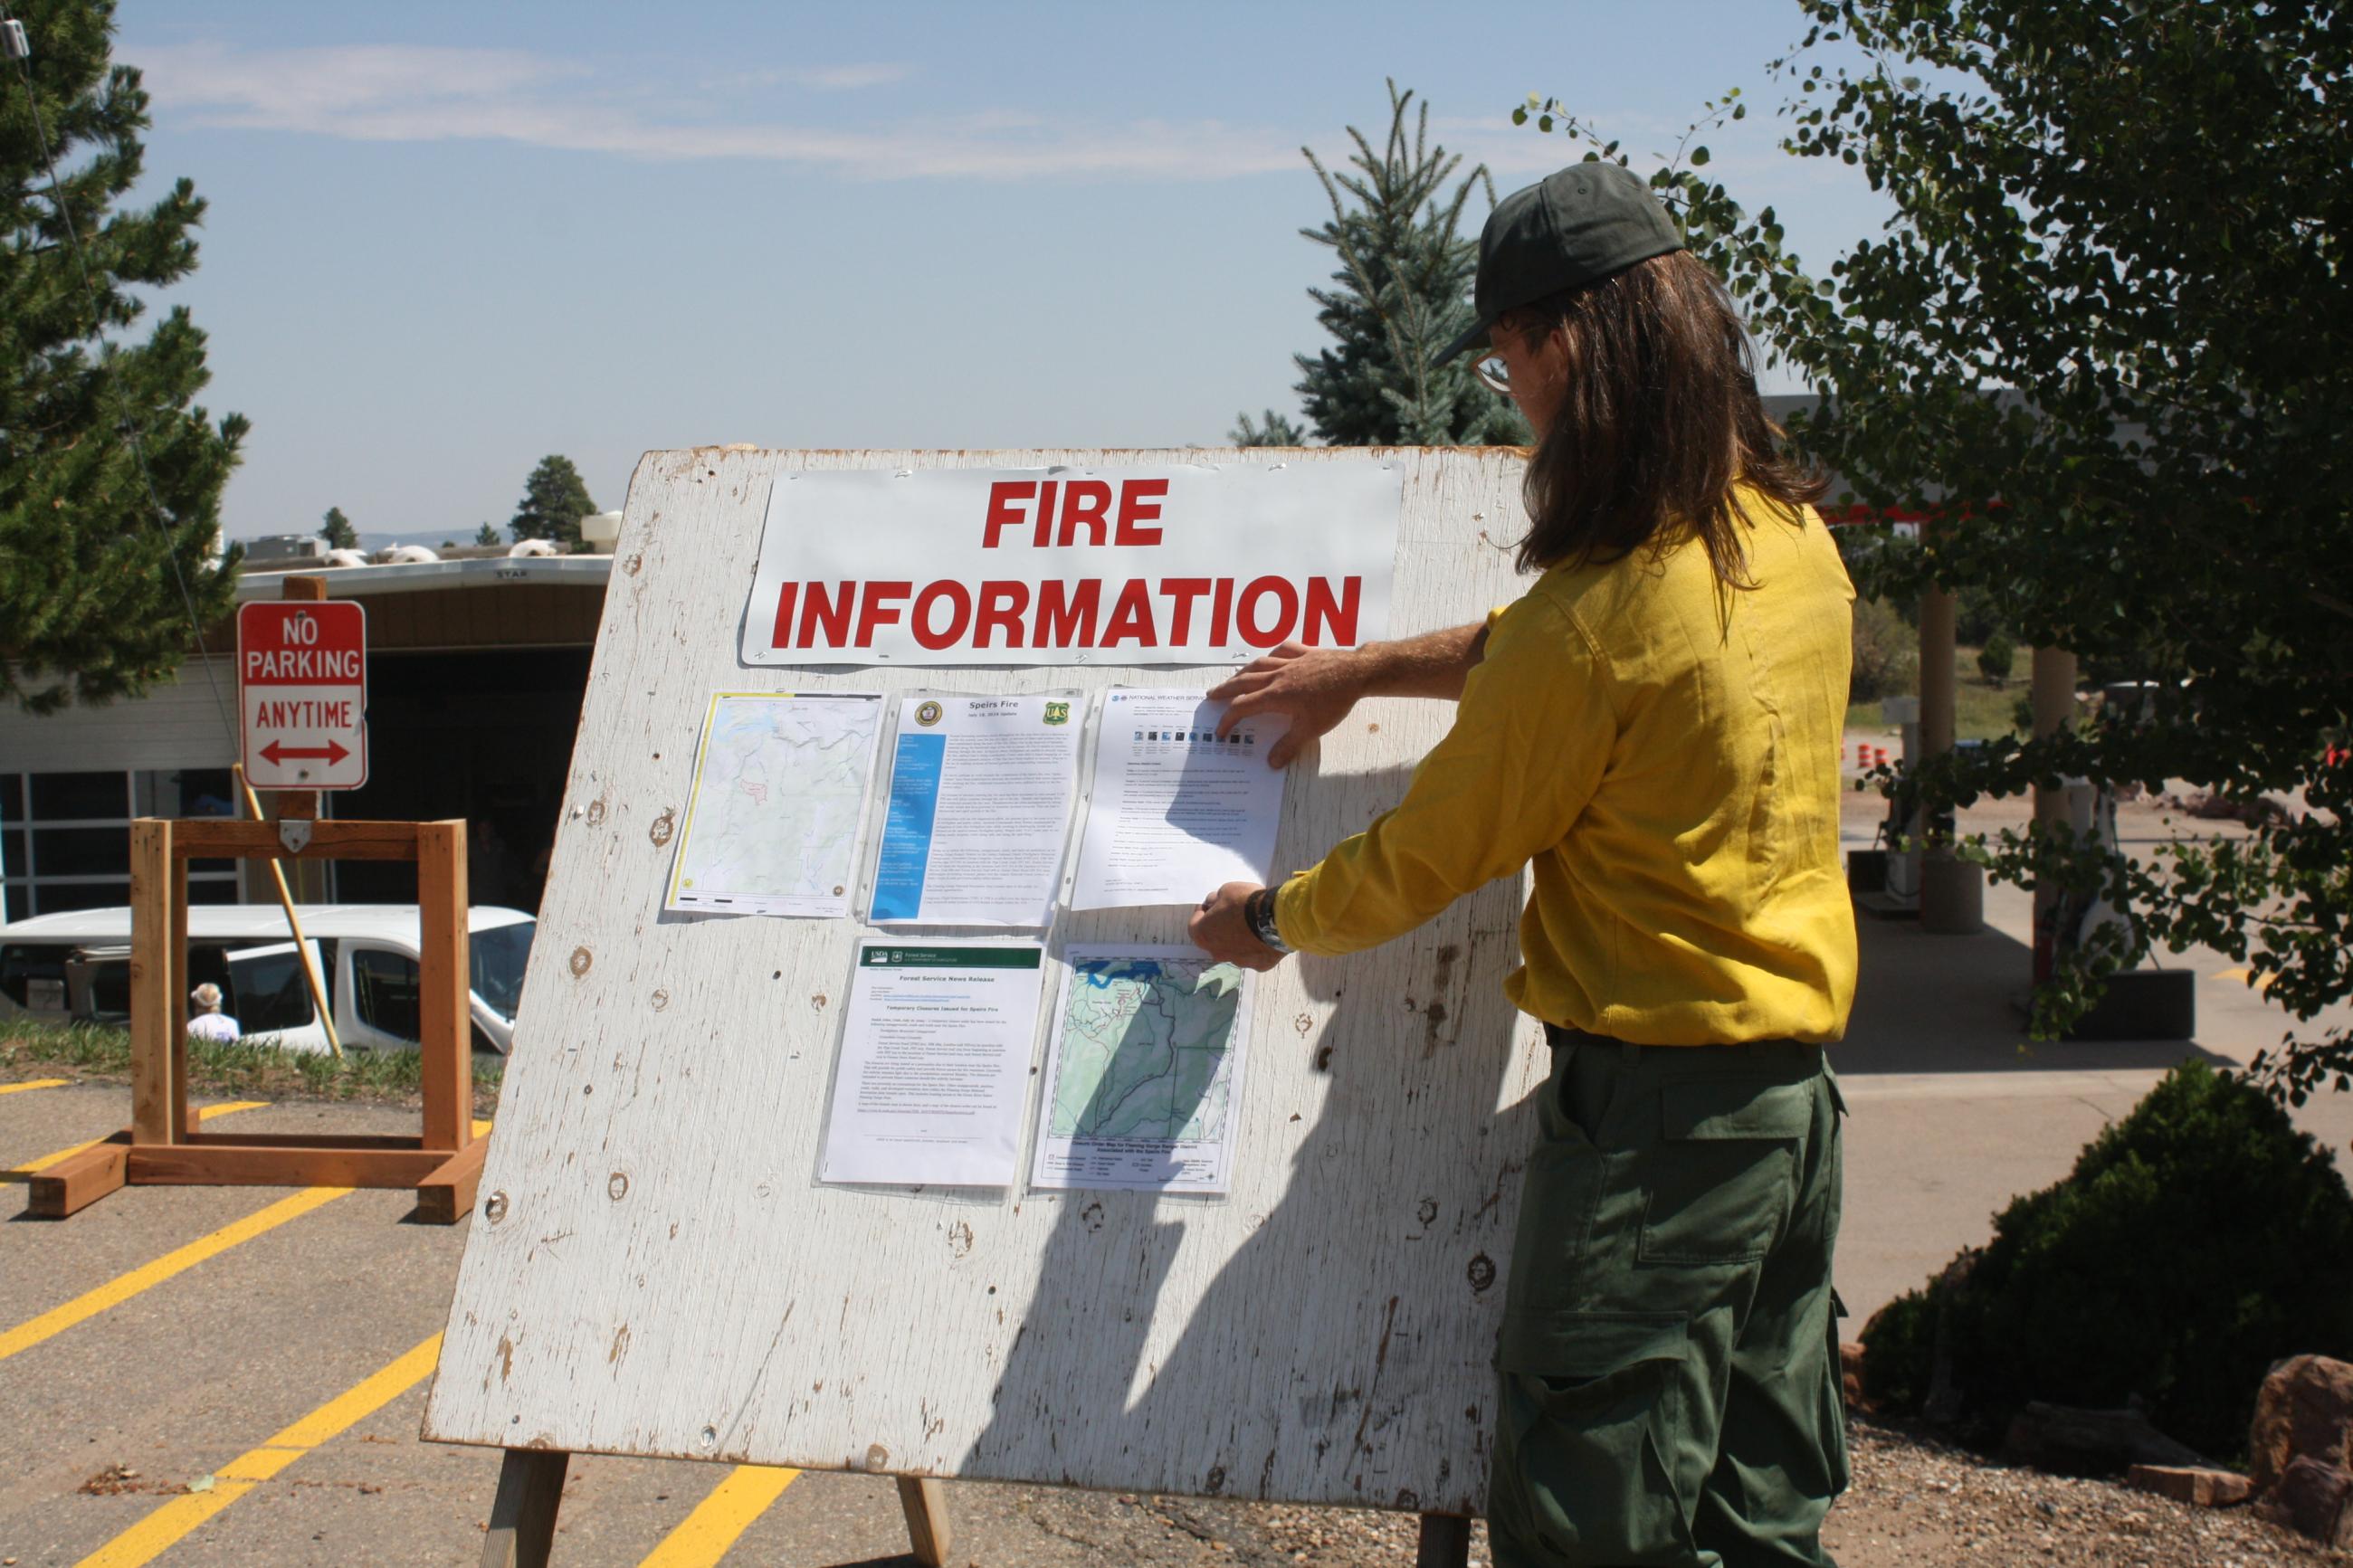 Fire information officer posting update information about the incident.